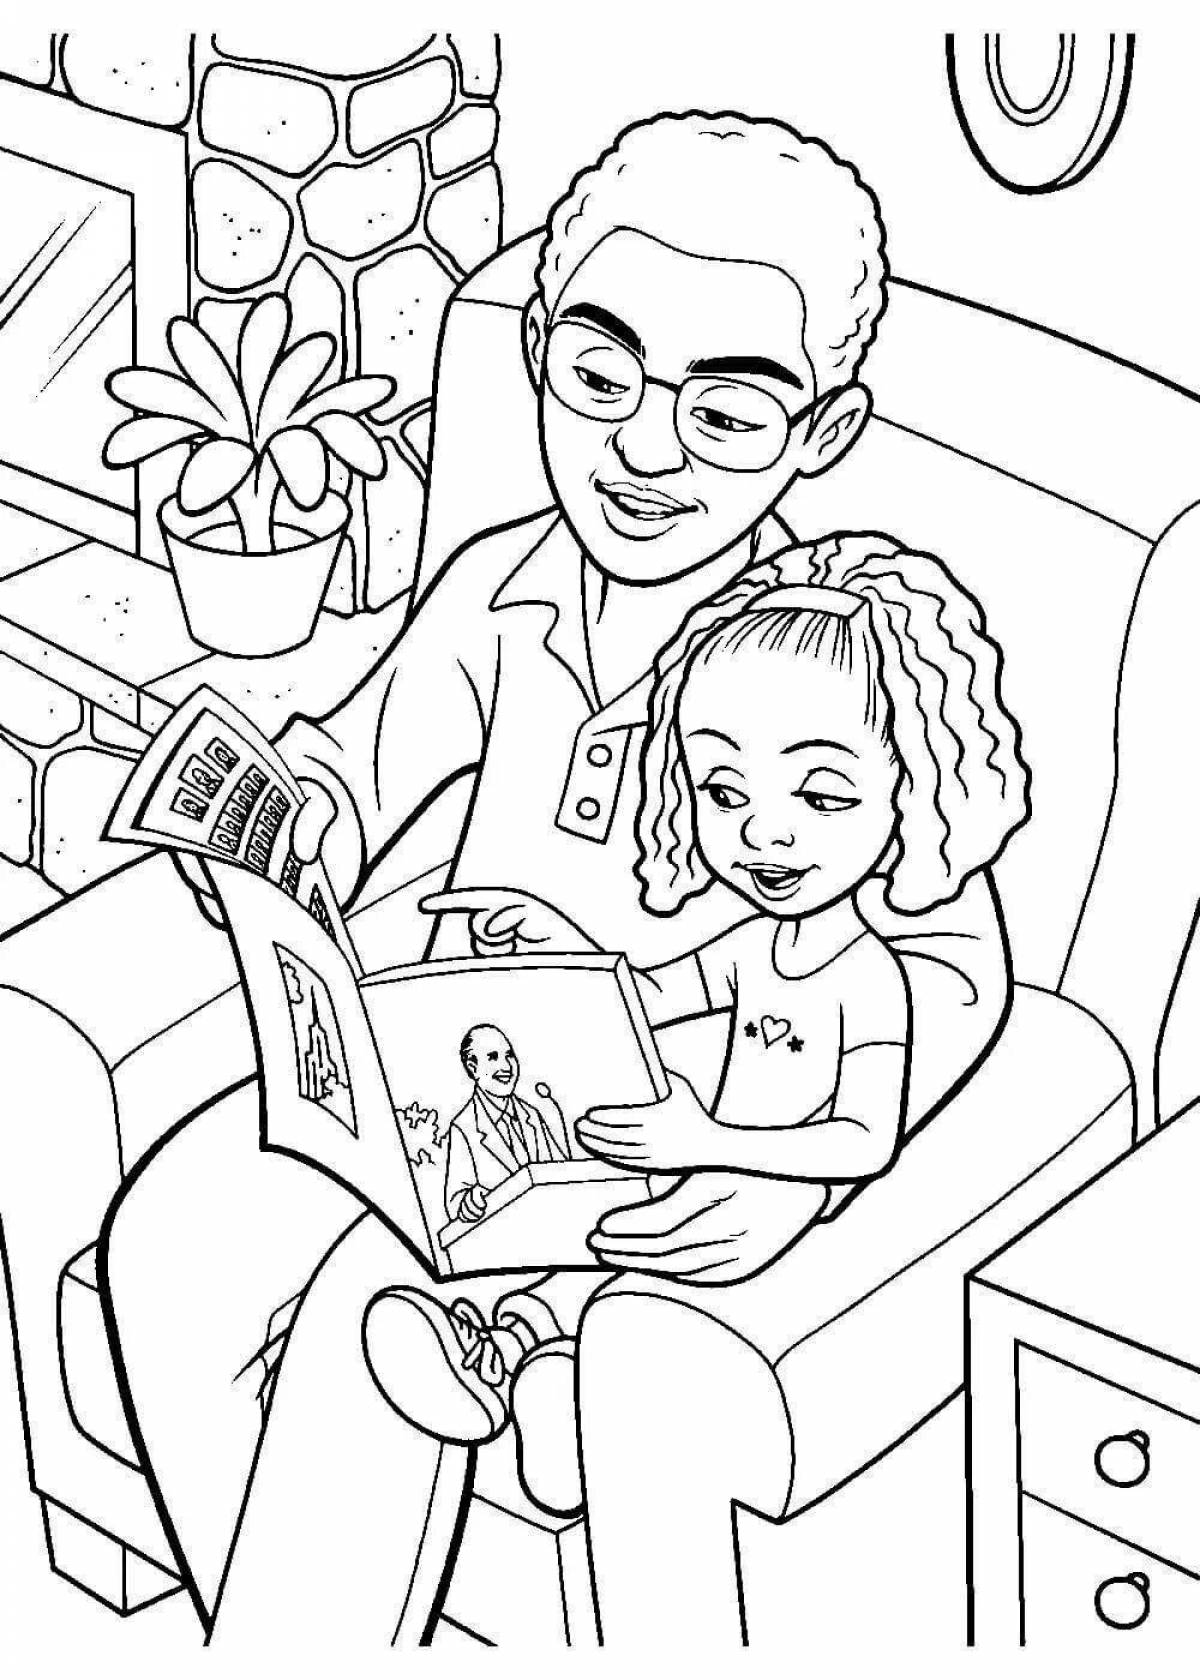 Dad's bright coloring for dad's day